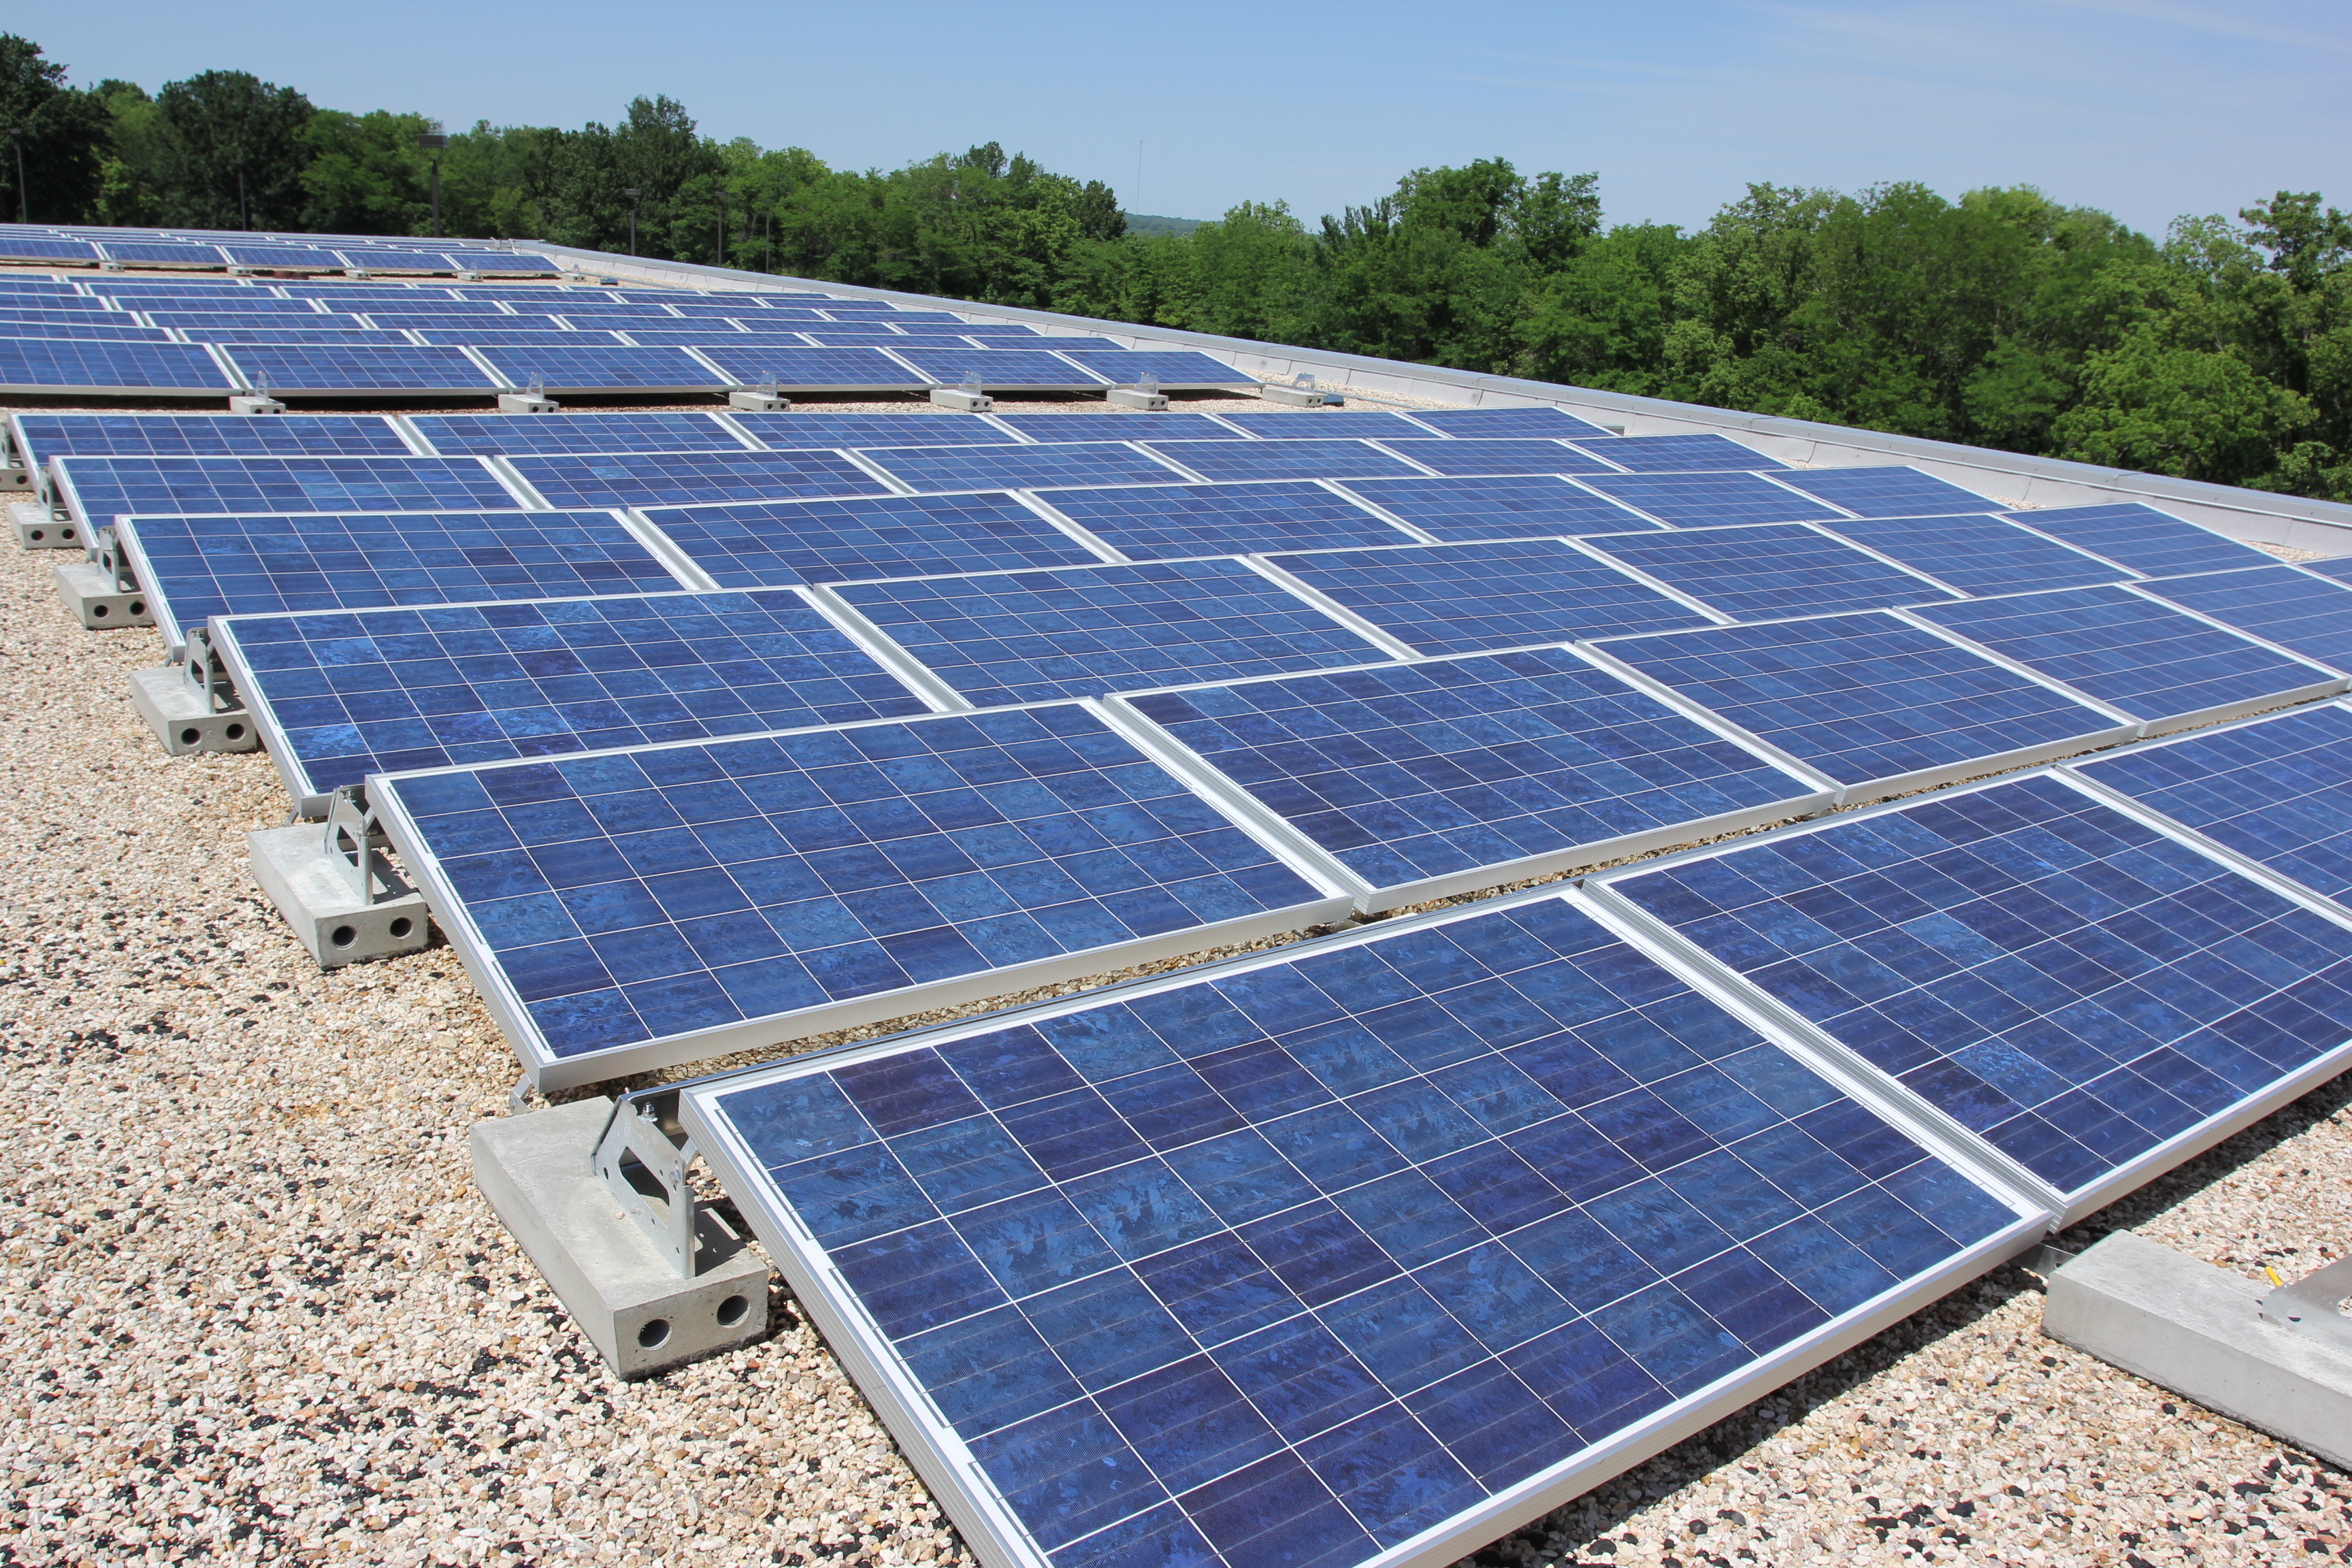 One of three 25 kilowatt solar energy systems installed previously by Brightergy for the KCMO Water Services Department. The City of Kansas City, Missouri plans to install solar on 80 municipal buildings through partnerships with Brightergy and KCP&L.